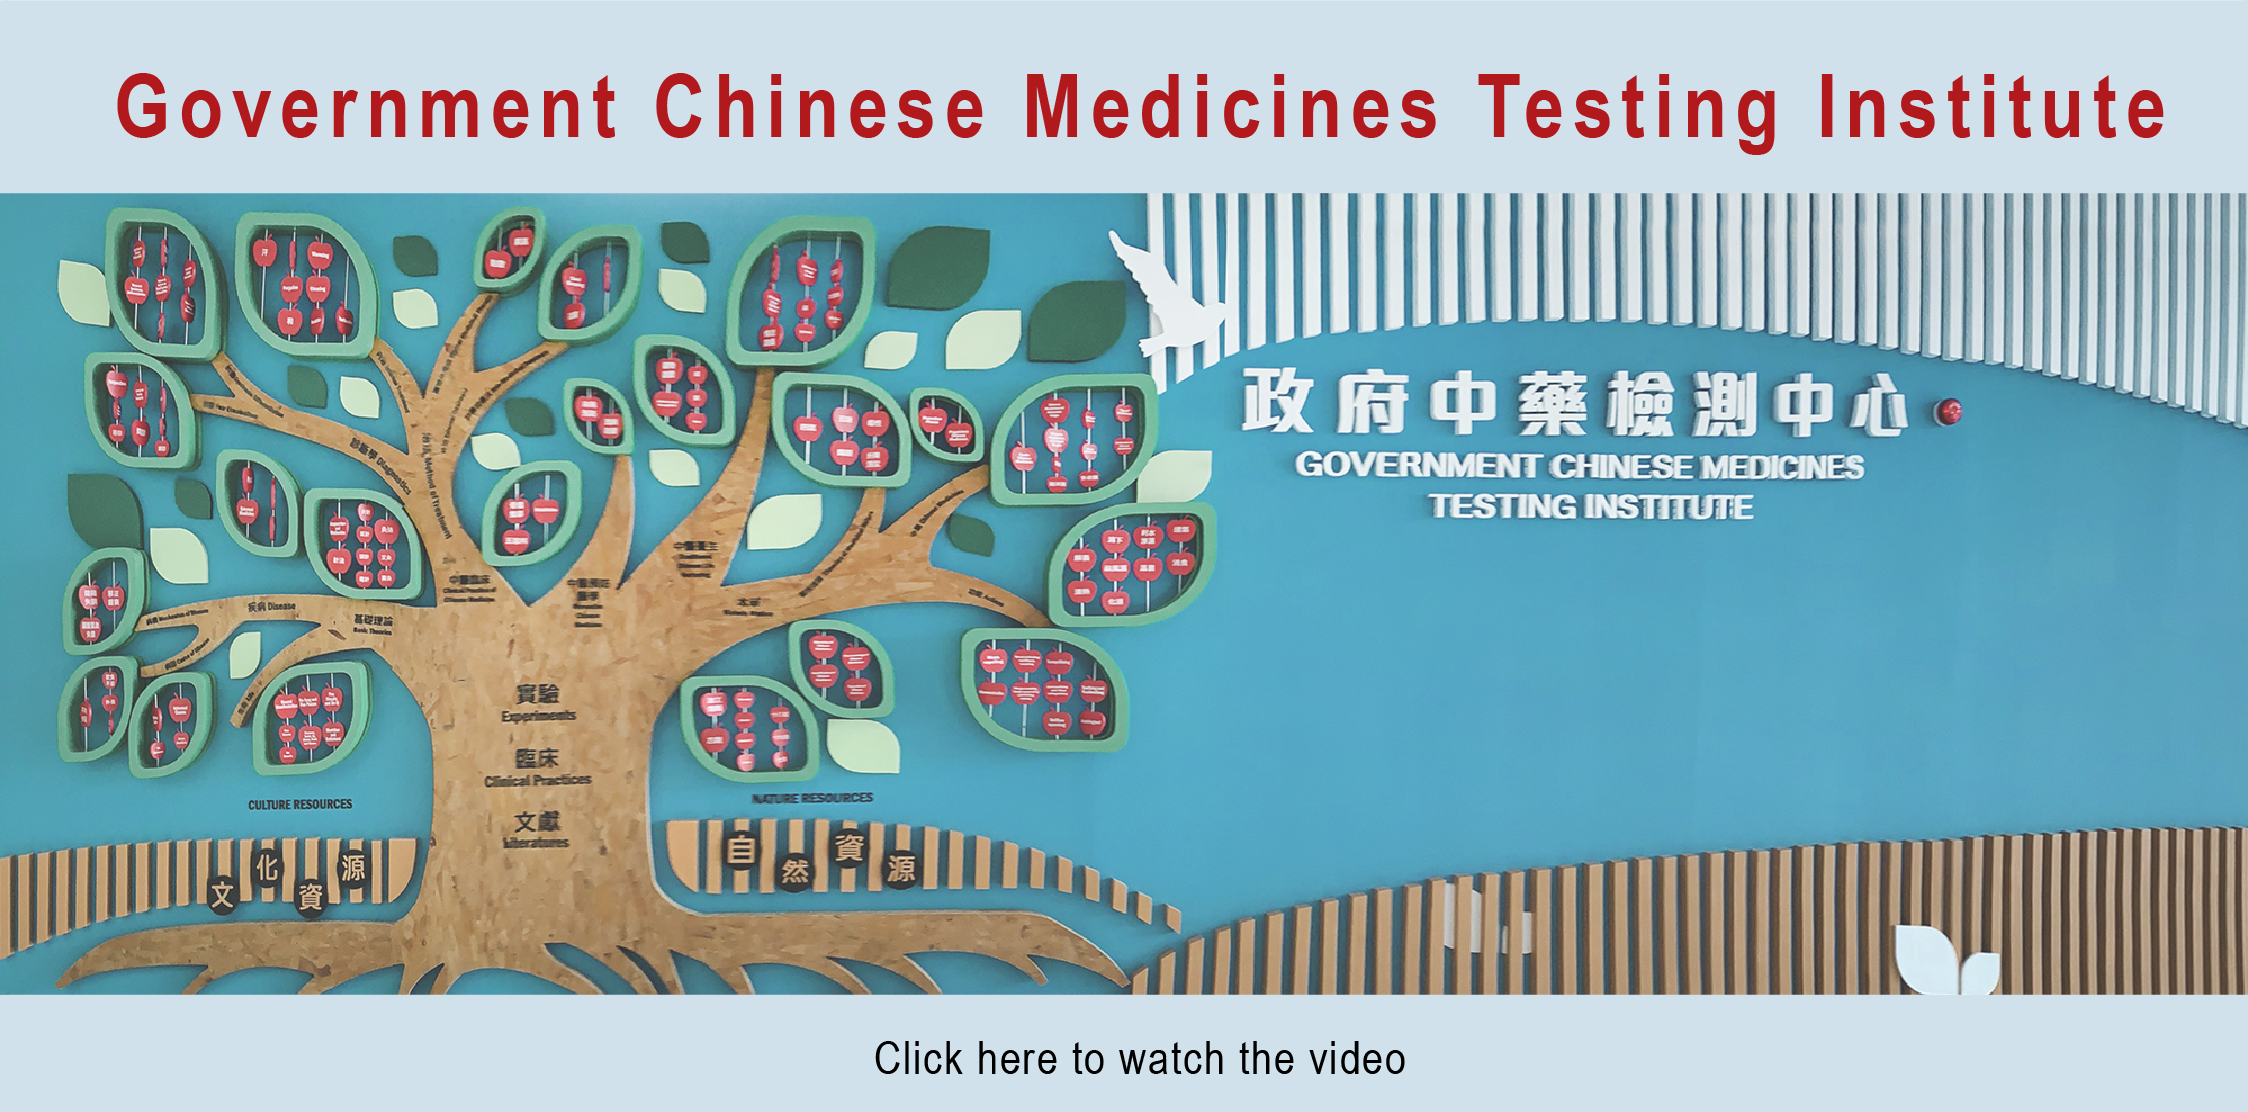 Government Chinese Medicines Insititute